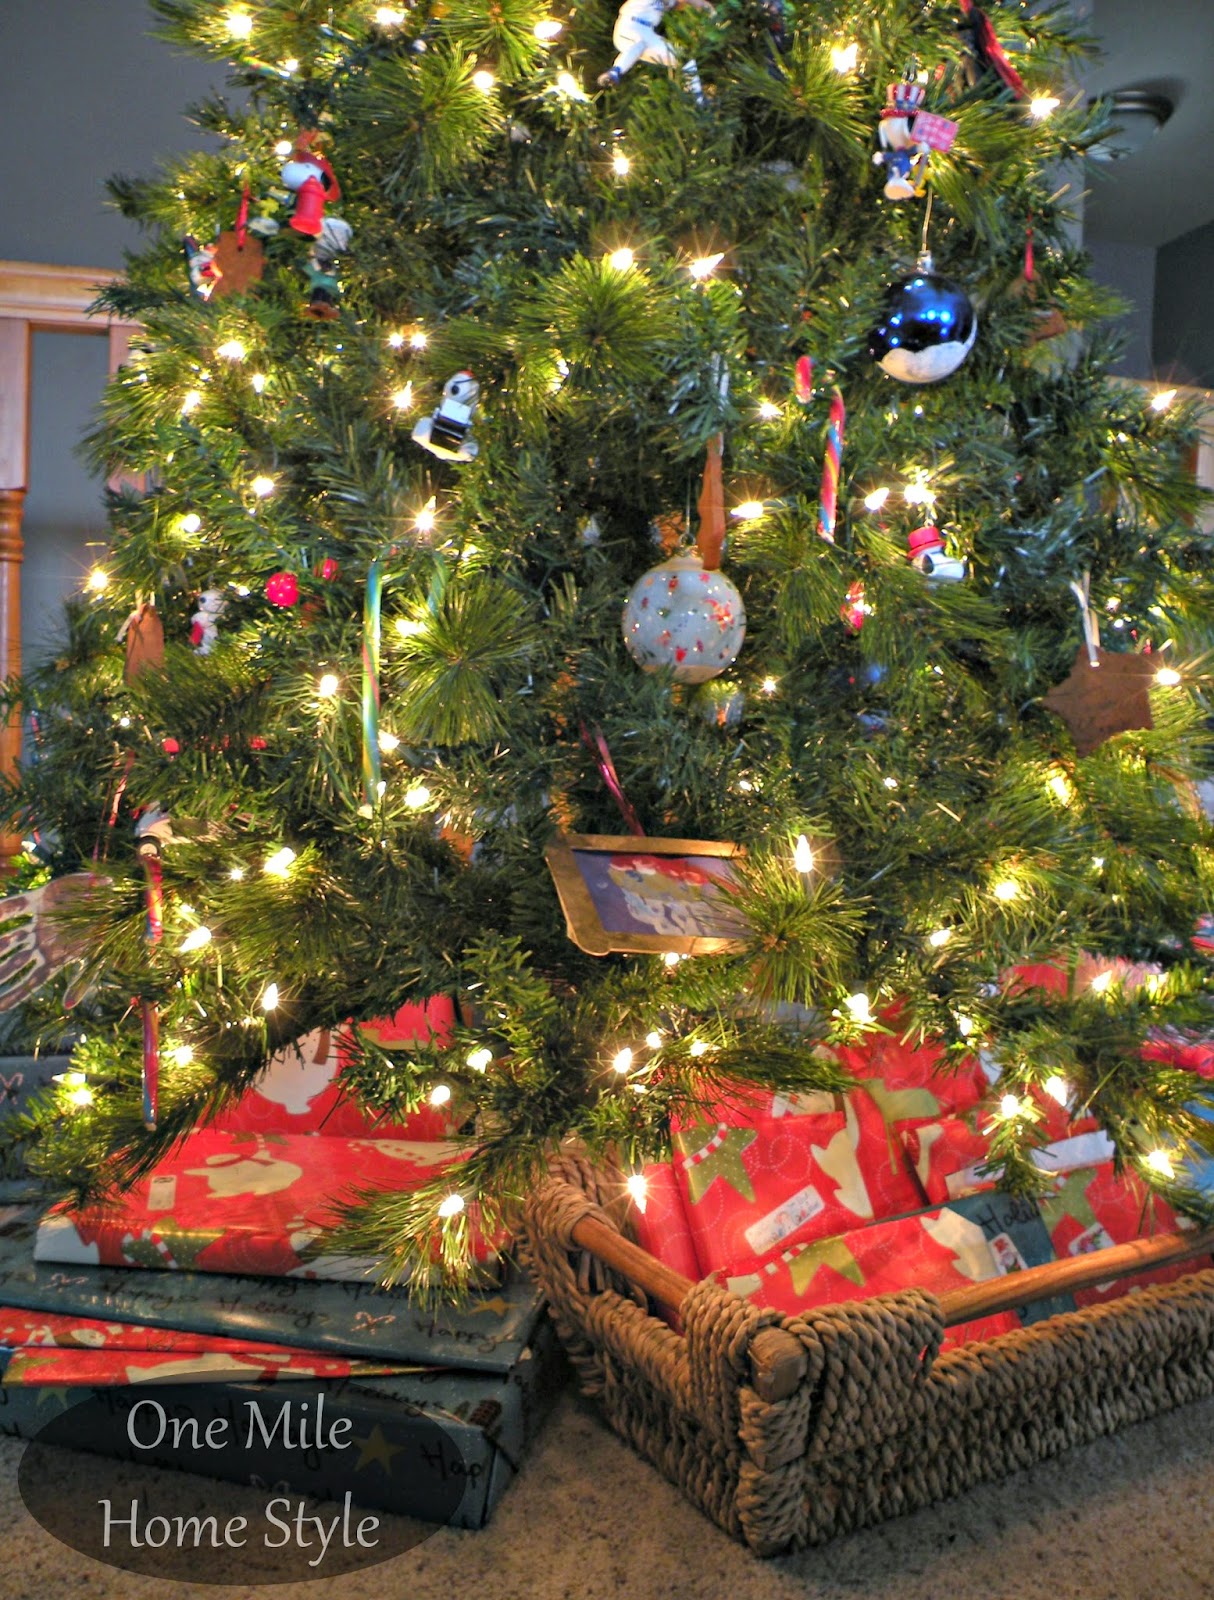 One Mile Home Style Christmas Tree 2014 - Using a basket to hold small gifts under the tree